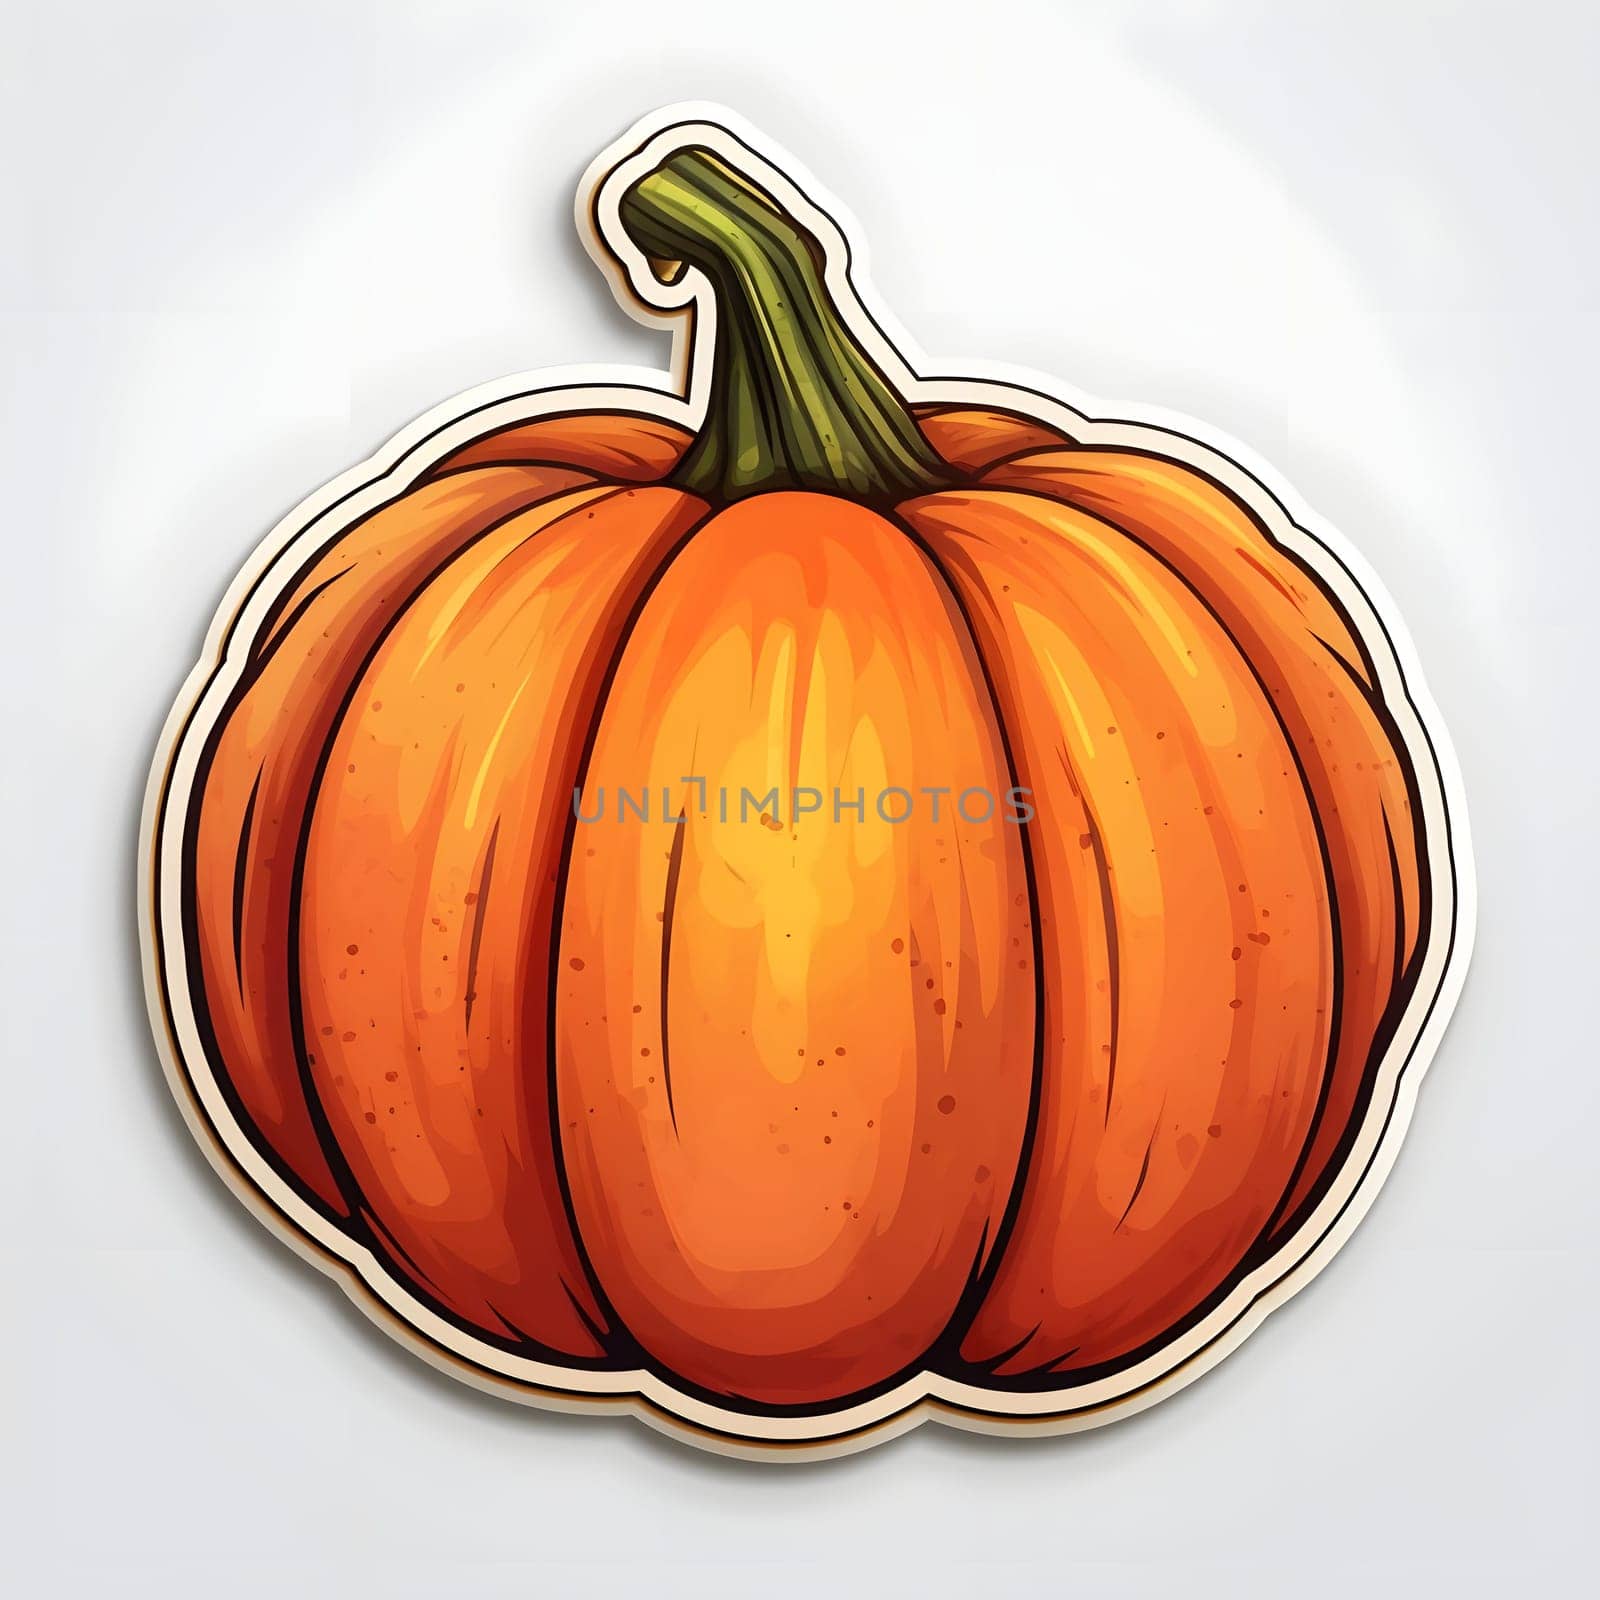 Pumpkin sticker. Pumpkin as a dish of thanksgiving for the harvest, picture on a white isolated background. by ThemesS